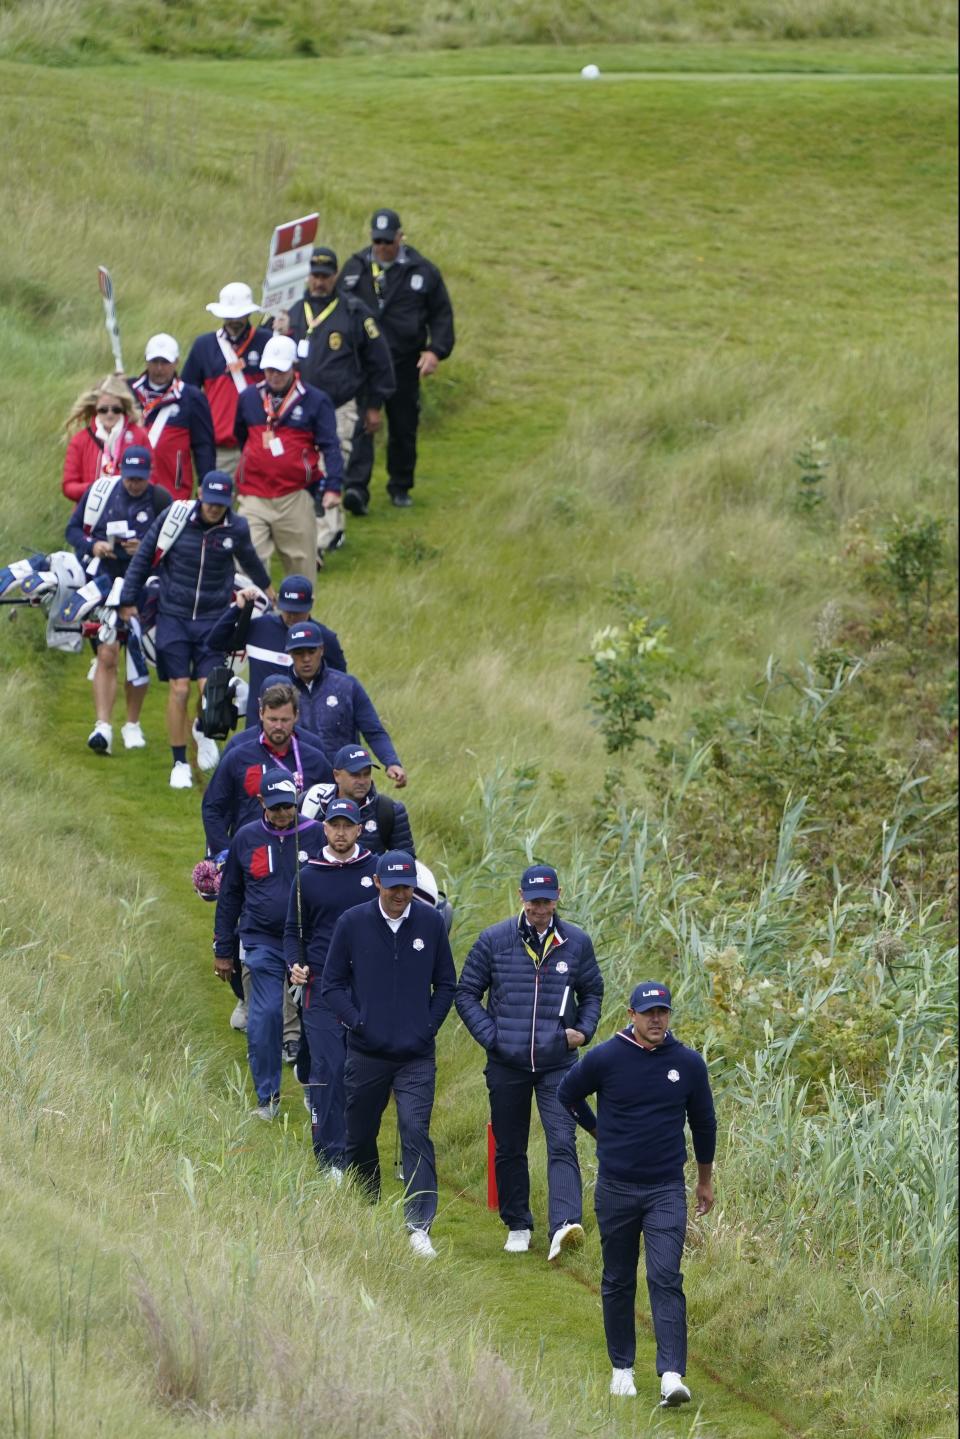 Team USA's Brooks Koepka and other team USA members walk off the 10th tee during a practice day at the Ryder Cup at the Whistling Straits Golf Course Wednesday, Sept. 22, 2021, in Sheboygan, Wis. (AP Photo/Charlie Neibergall)